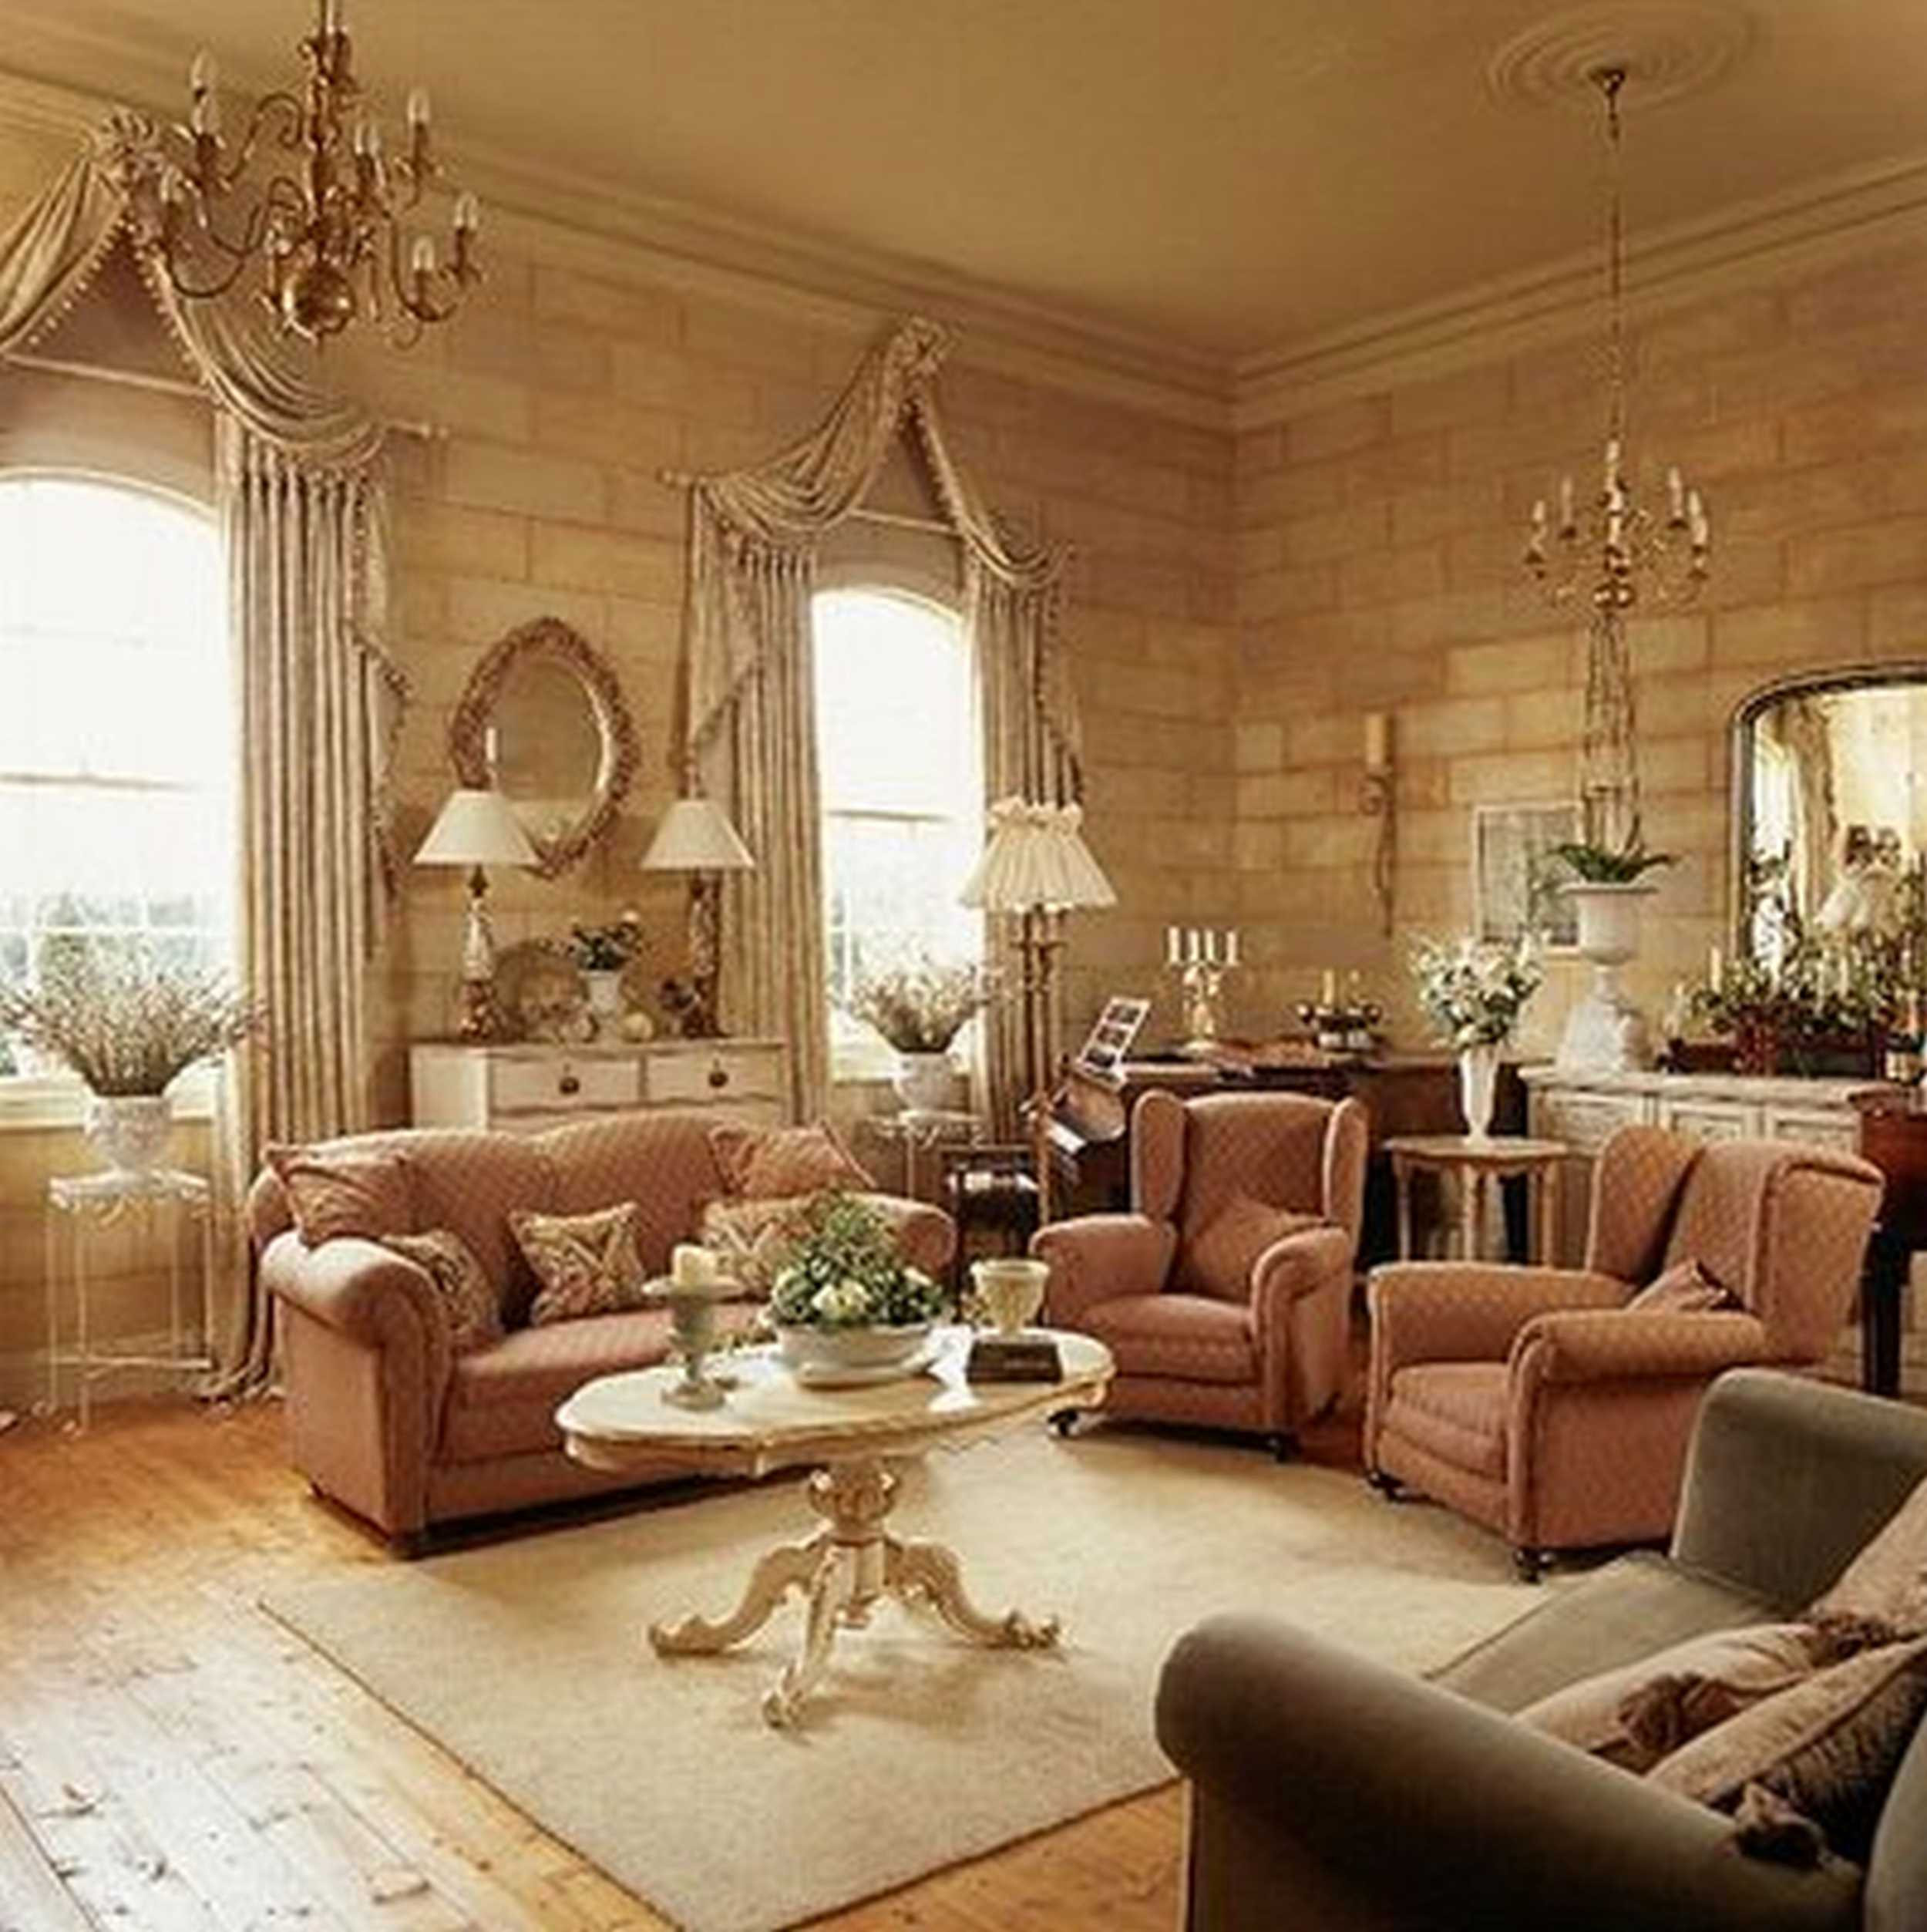 home decor ideas living room decoration pictures luxury living room traditional decorating ideas awesome shaker chairs 0d of home decor ideas living room decoration pictures